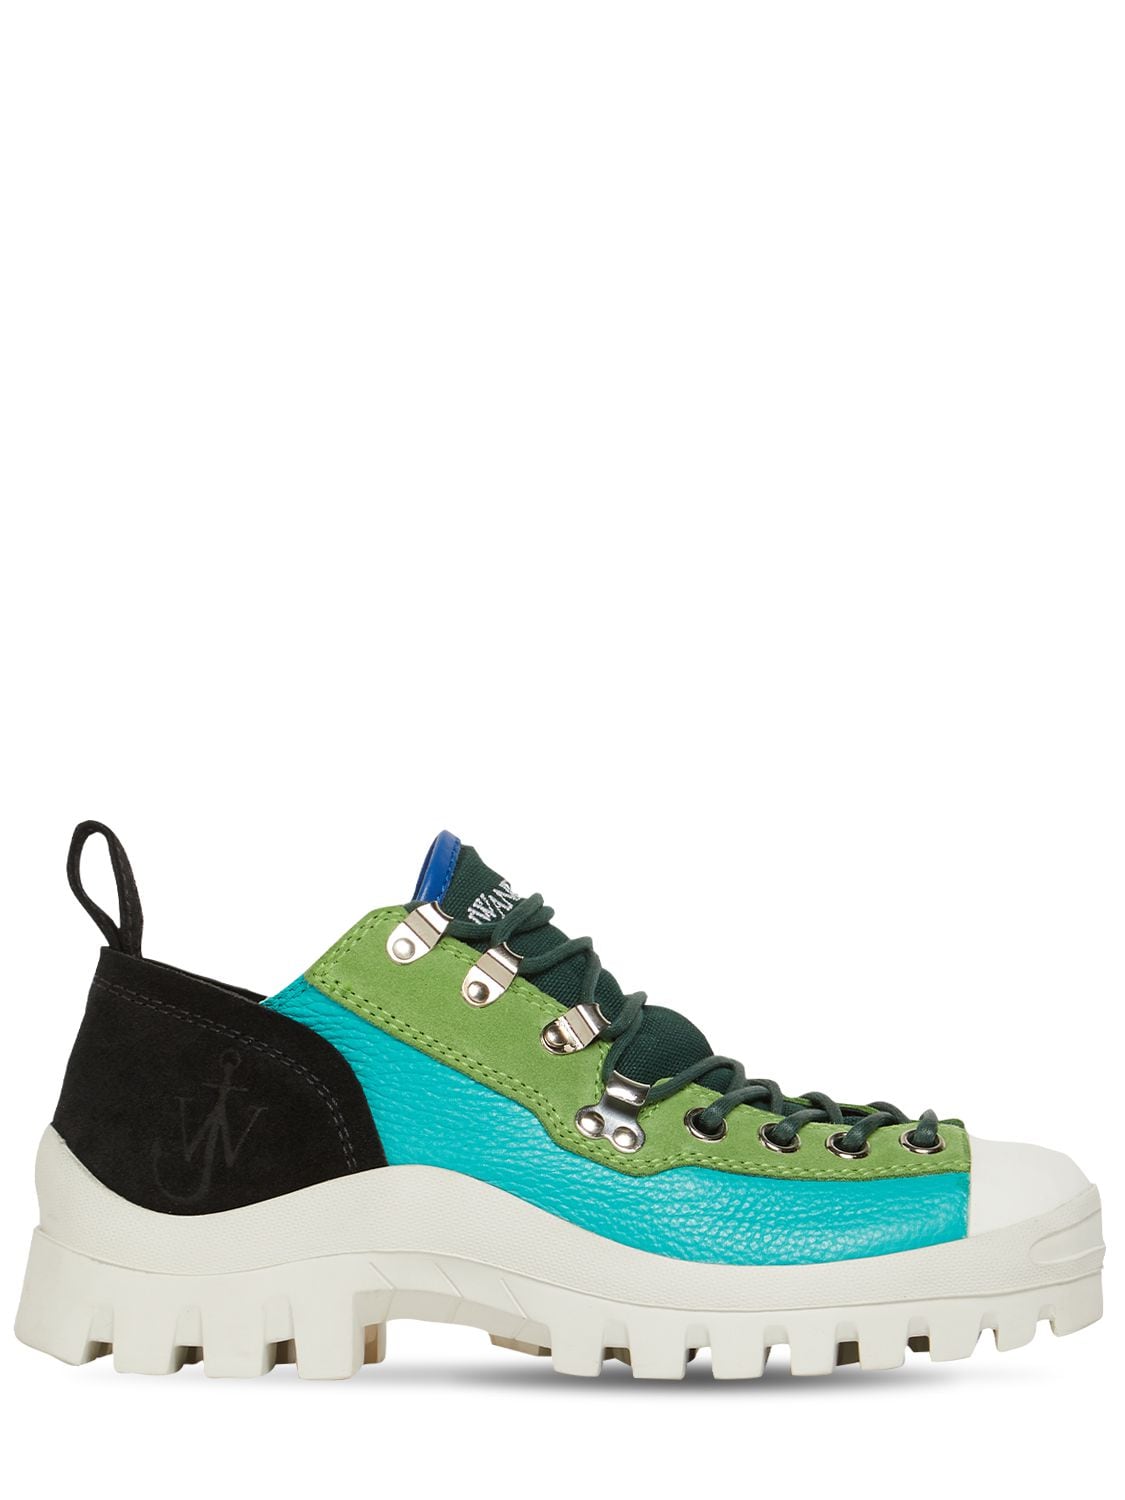 JW Anderson - 20mm leather, suede & canvas sneakers - Turquoise/Green ...